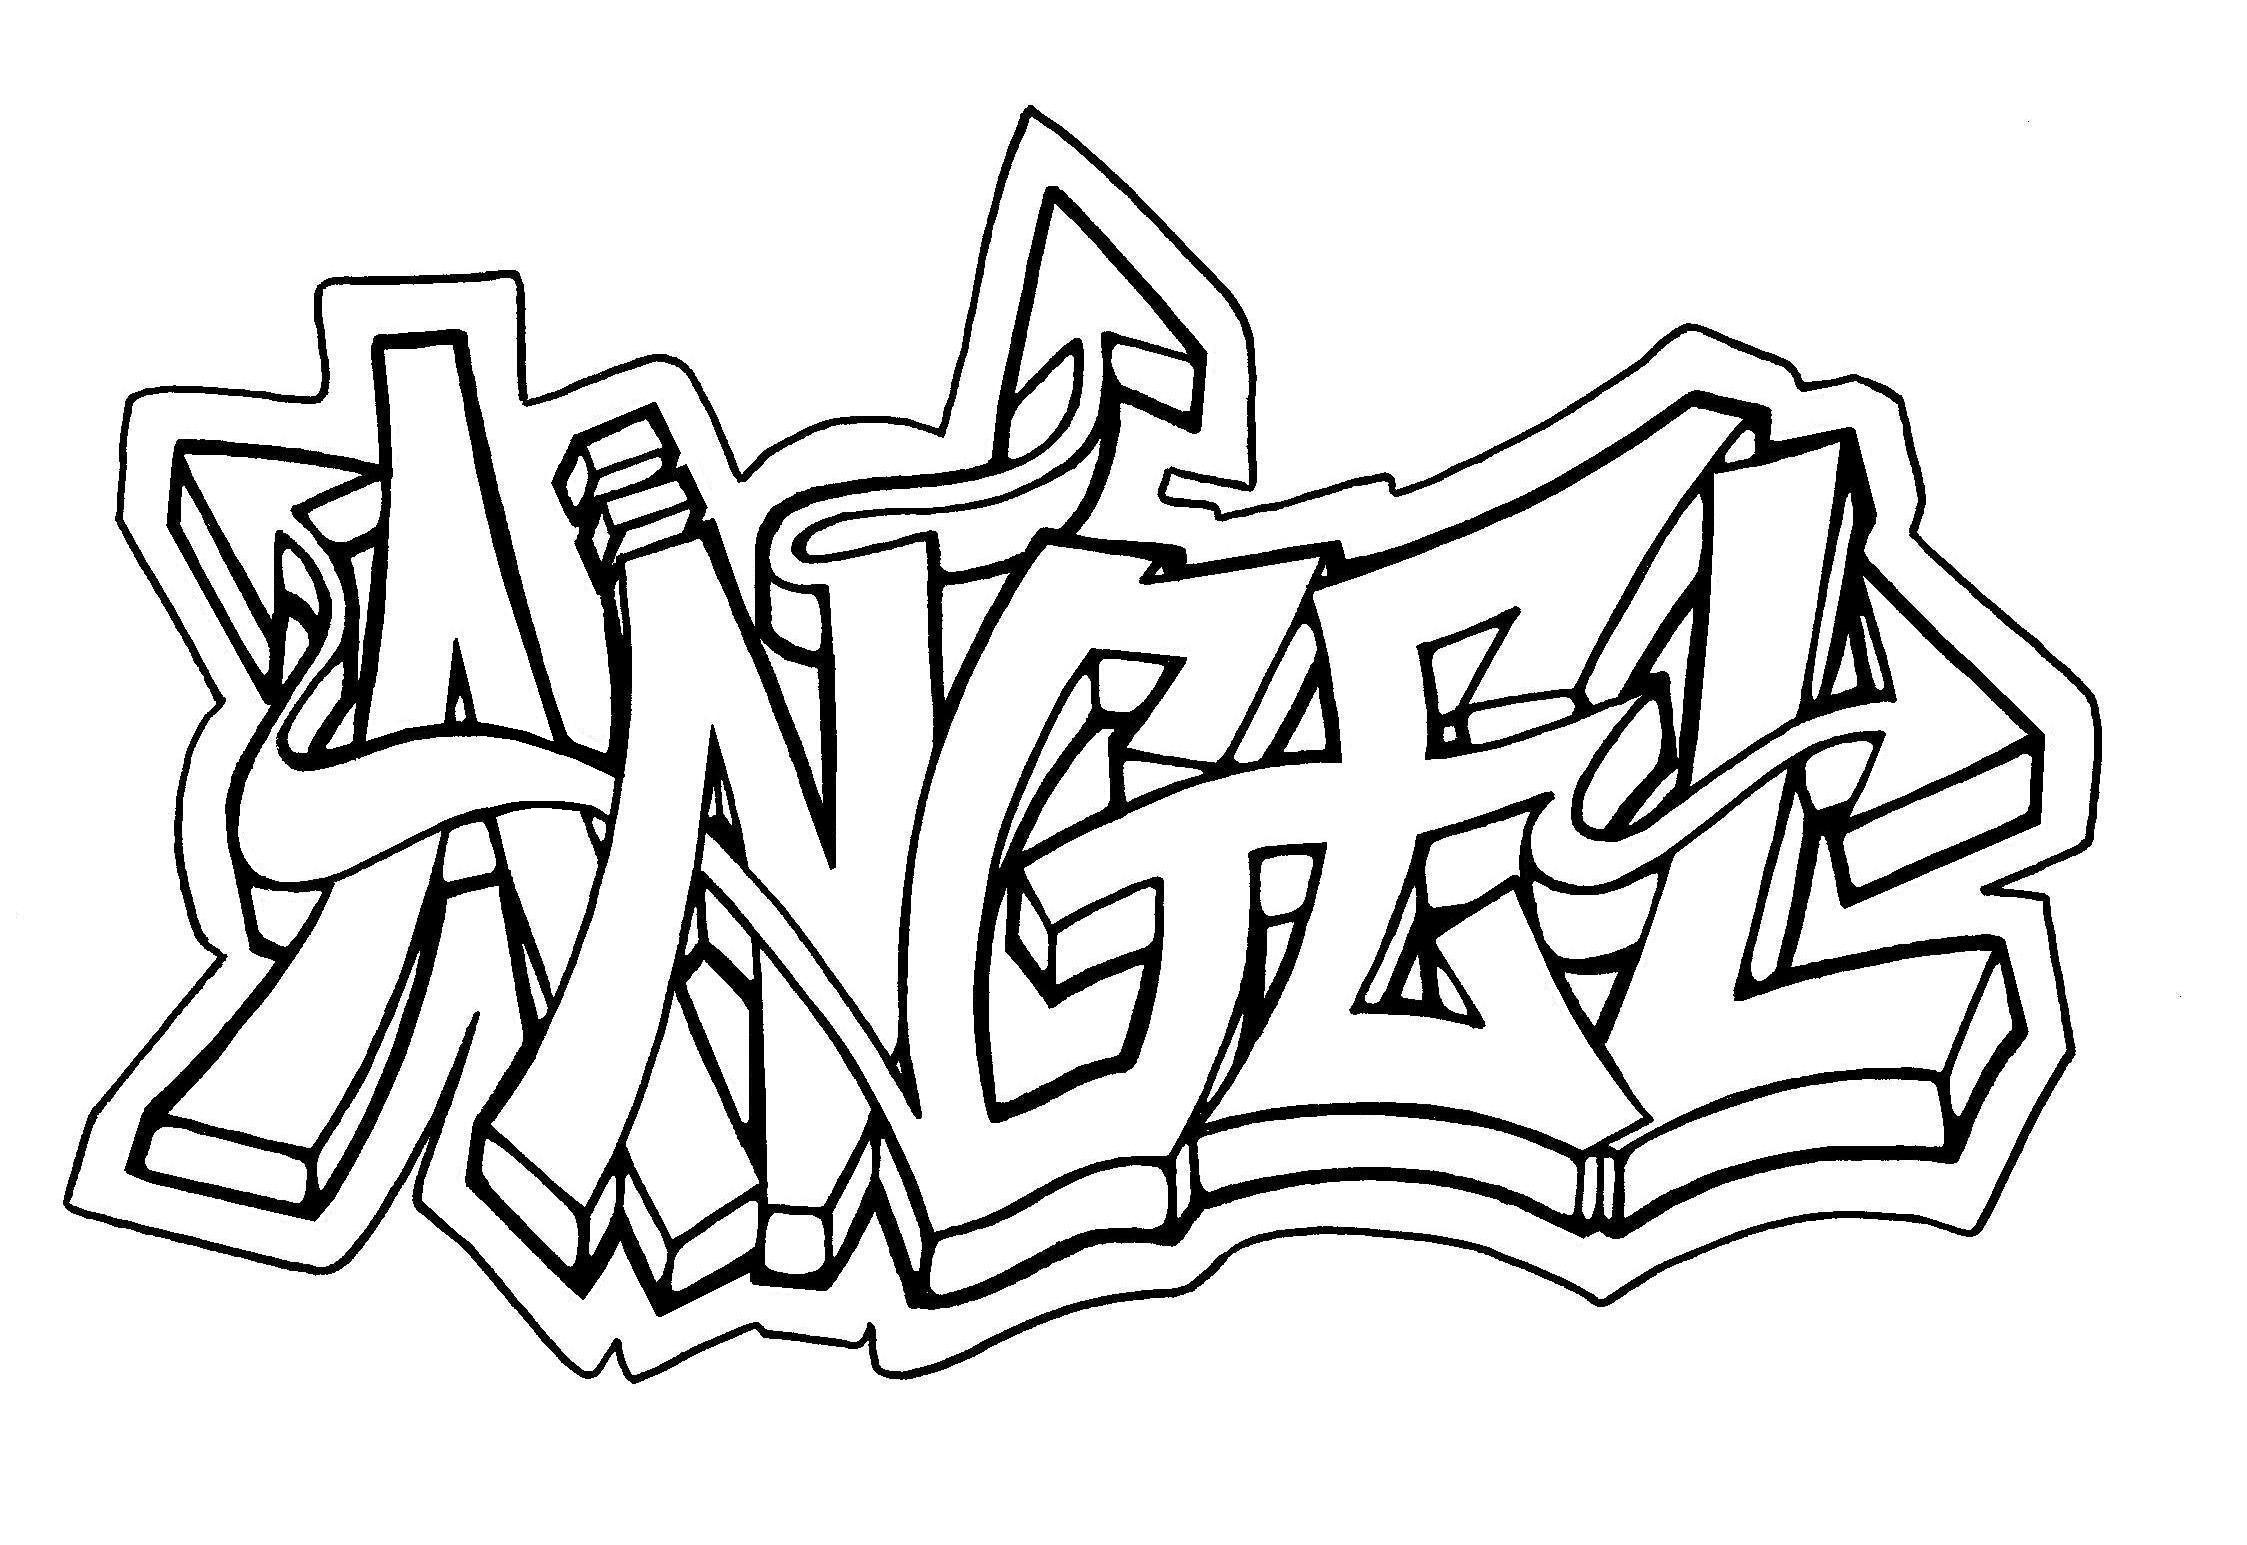 Graffiti coloring pages for teens and adults